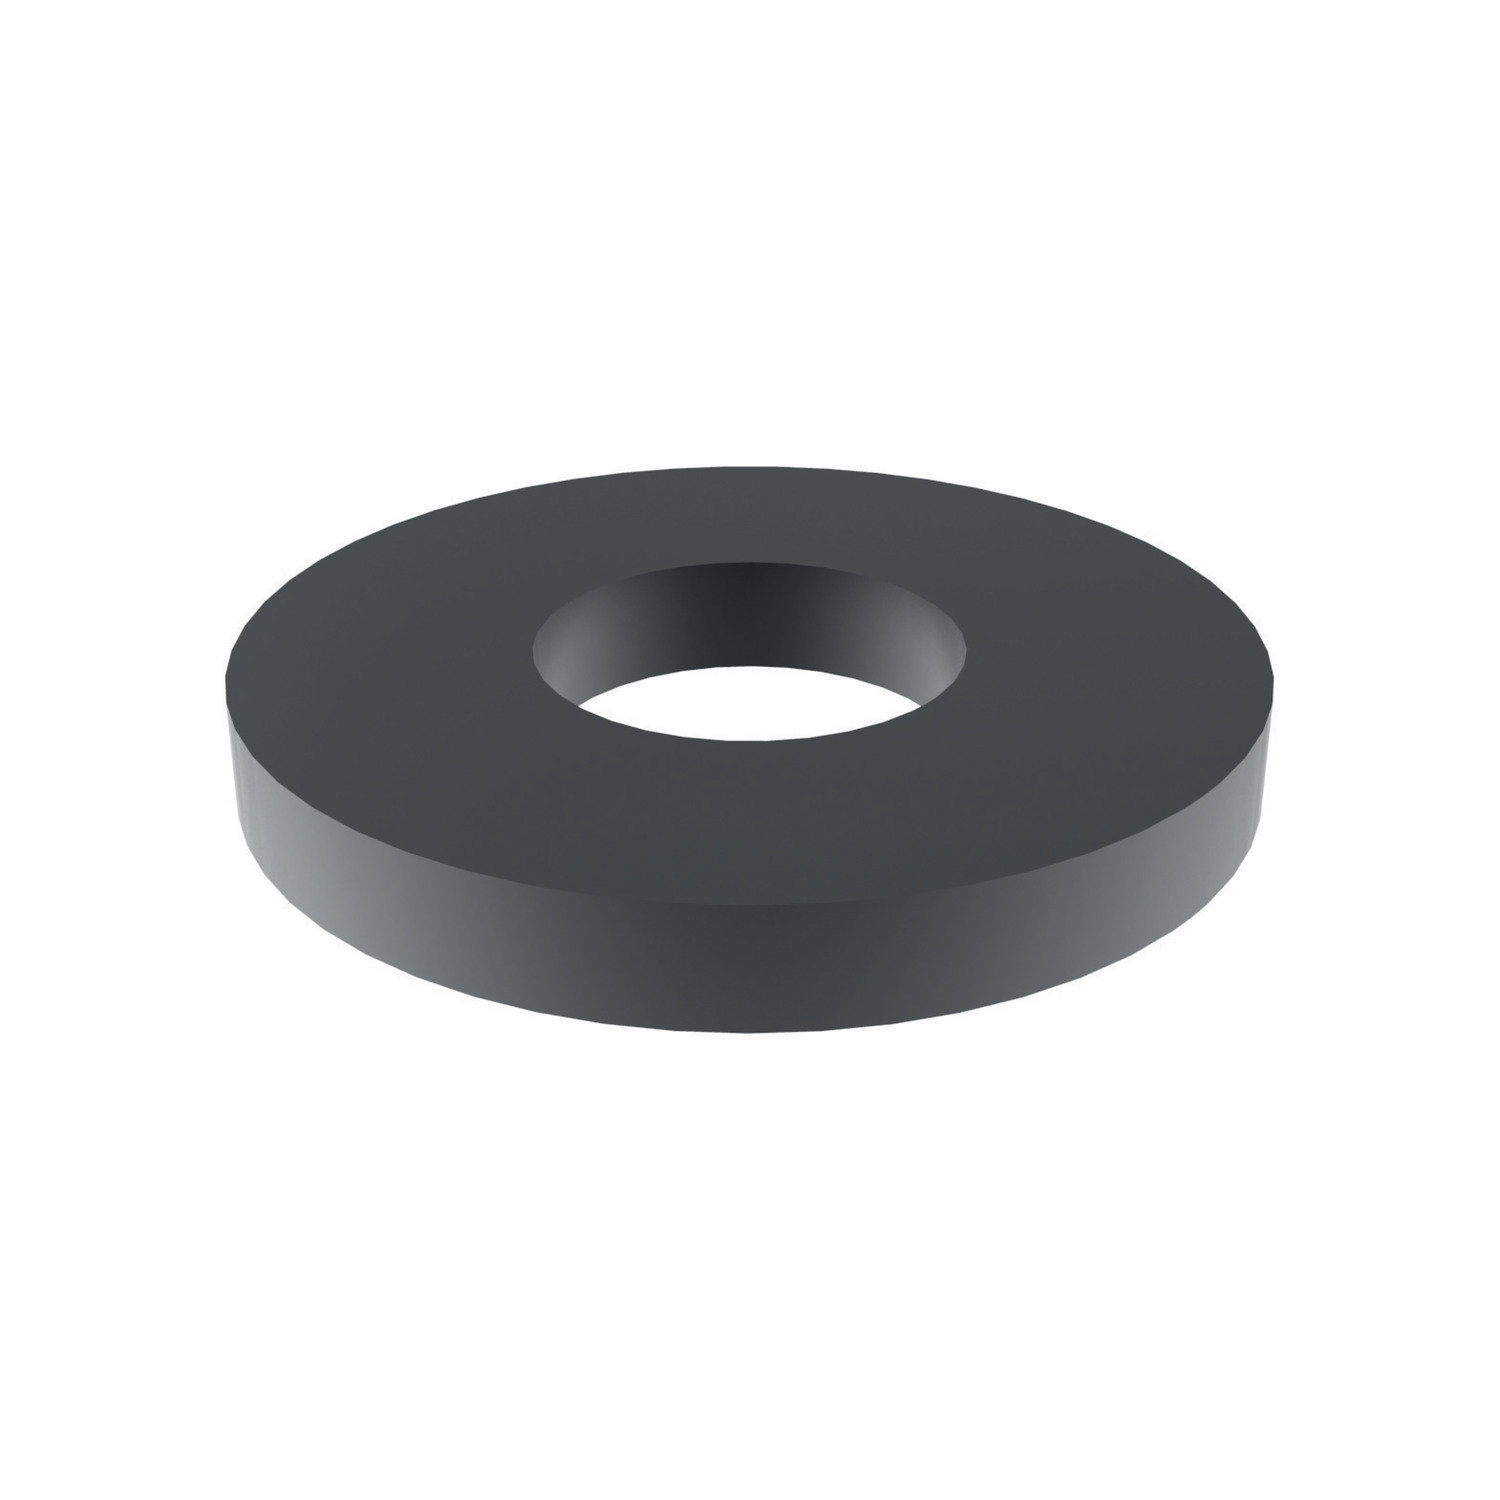 Plain Washers Standard fixturing washers made from hardened steel to DIN 6340.